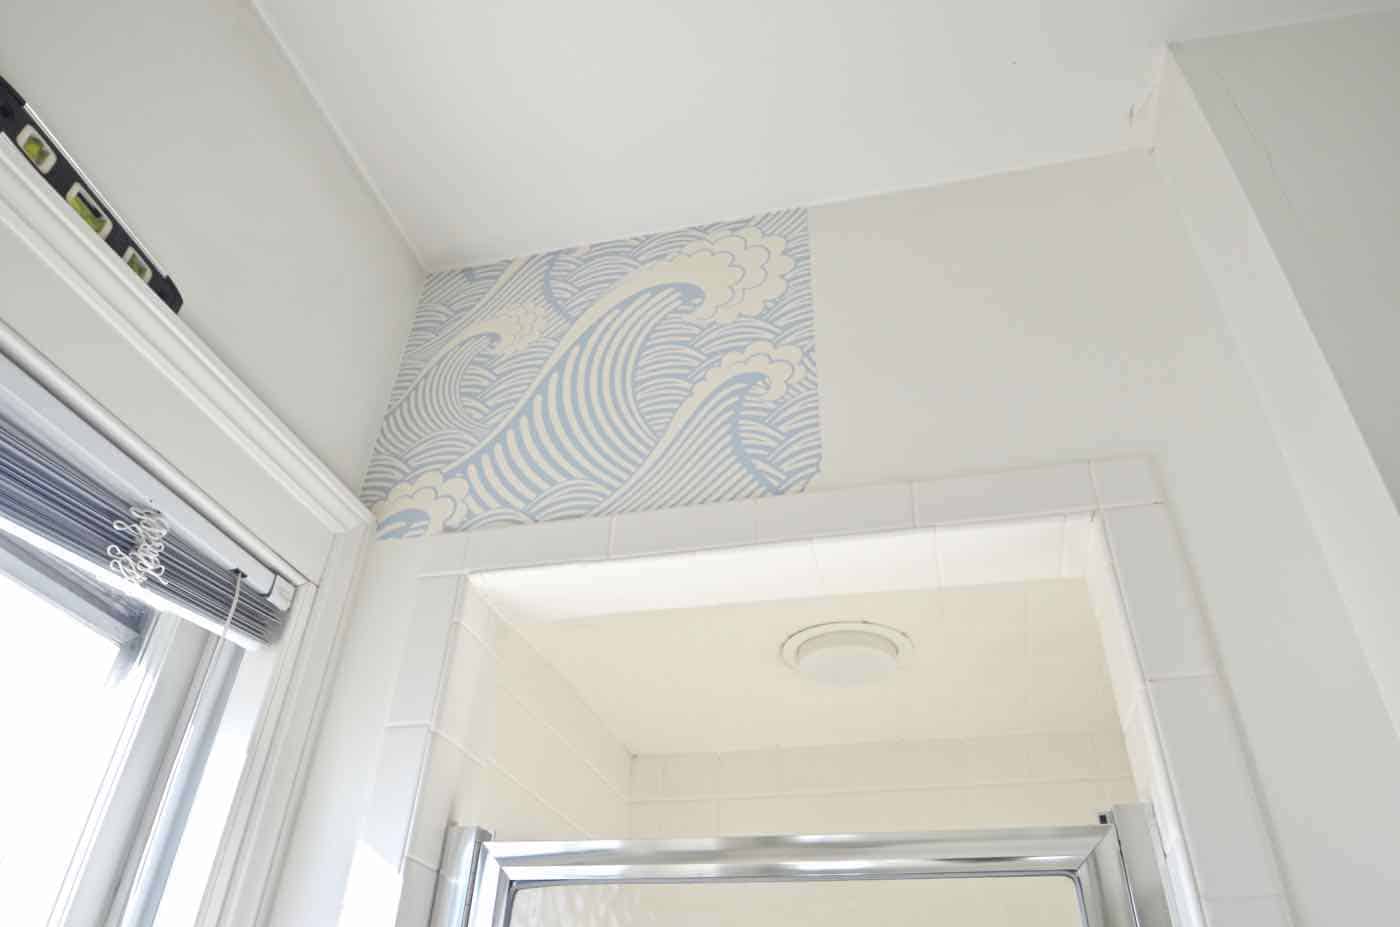 How to apply peel and stick removable wallpaper.